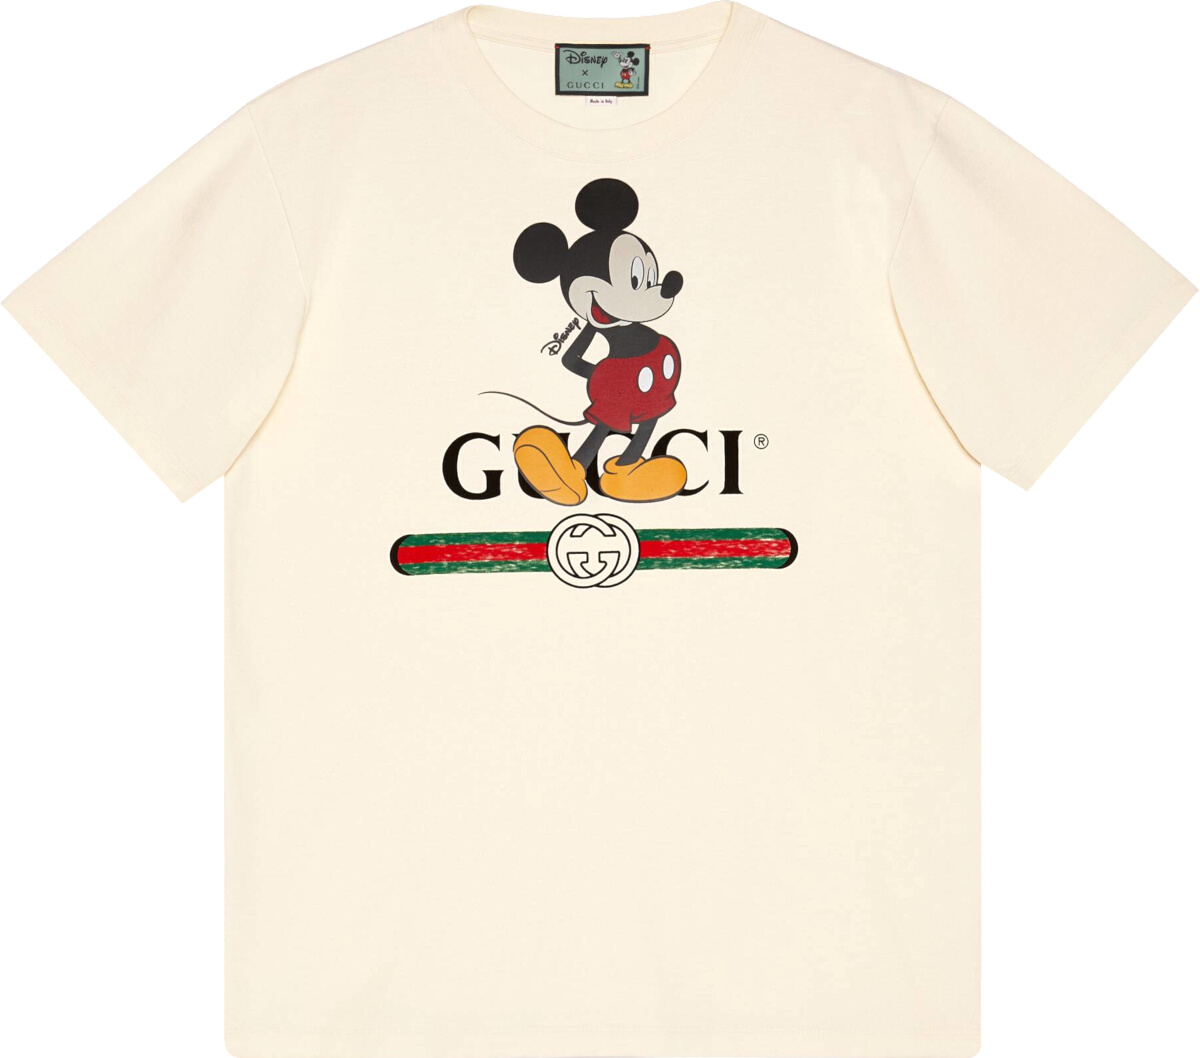 Gucci x Disney White Mickey Mouse T-Shirt | Incorporated Style